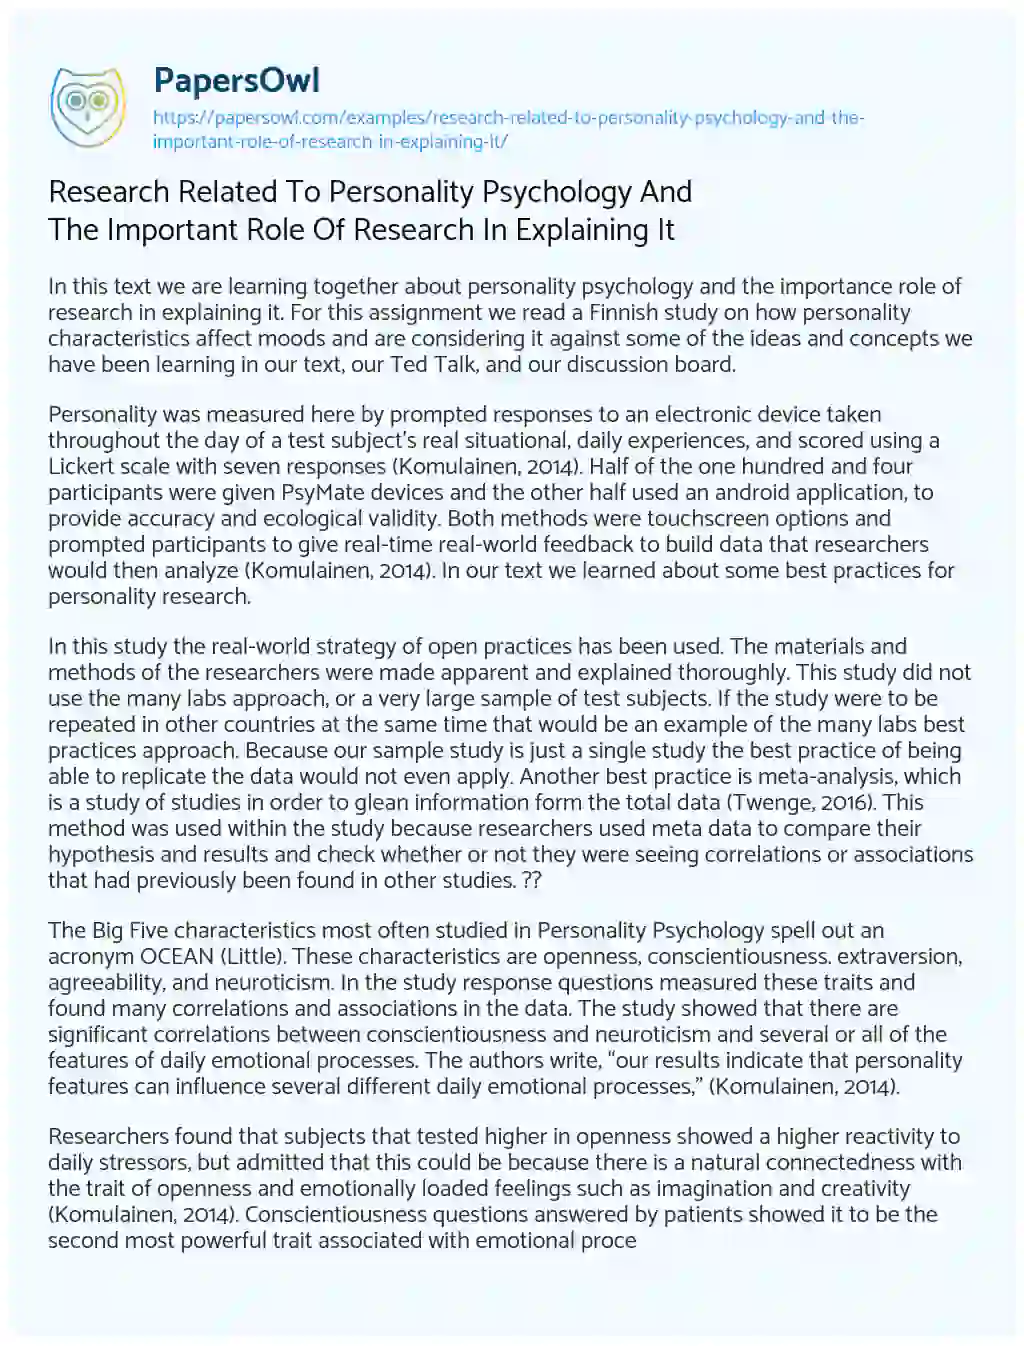 Essay on Research Related to Personality Psychology and the Important Role of Research in Explaining it